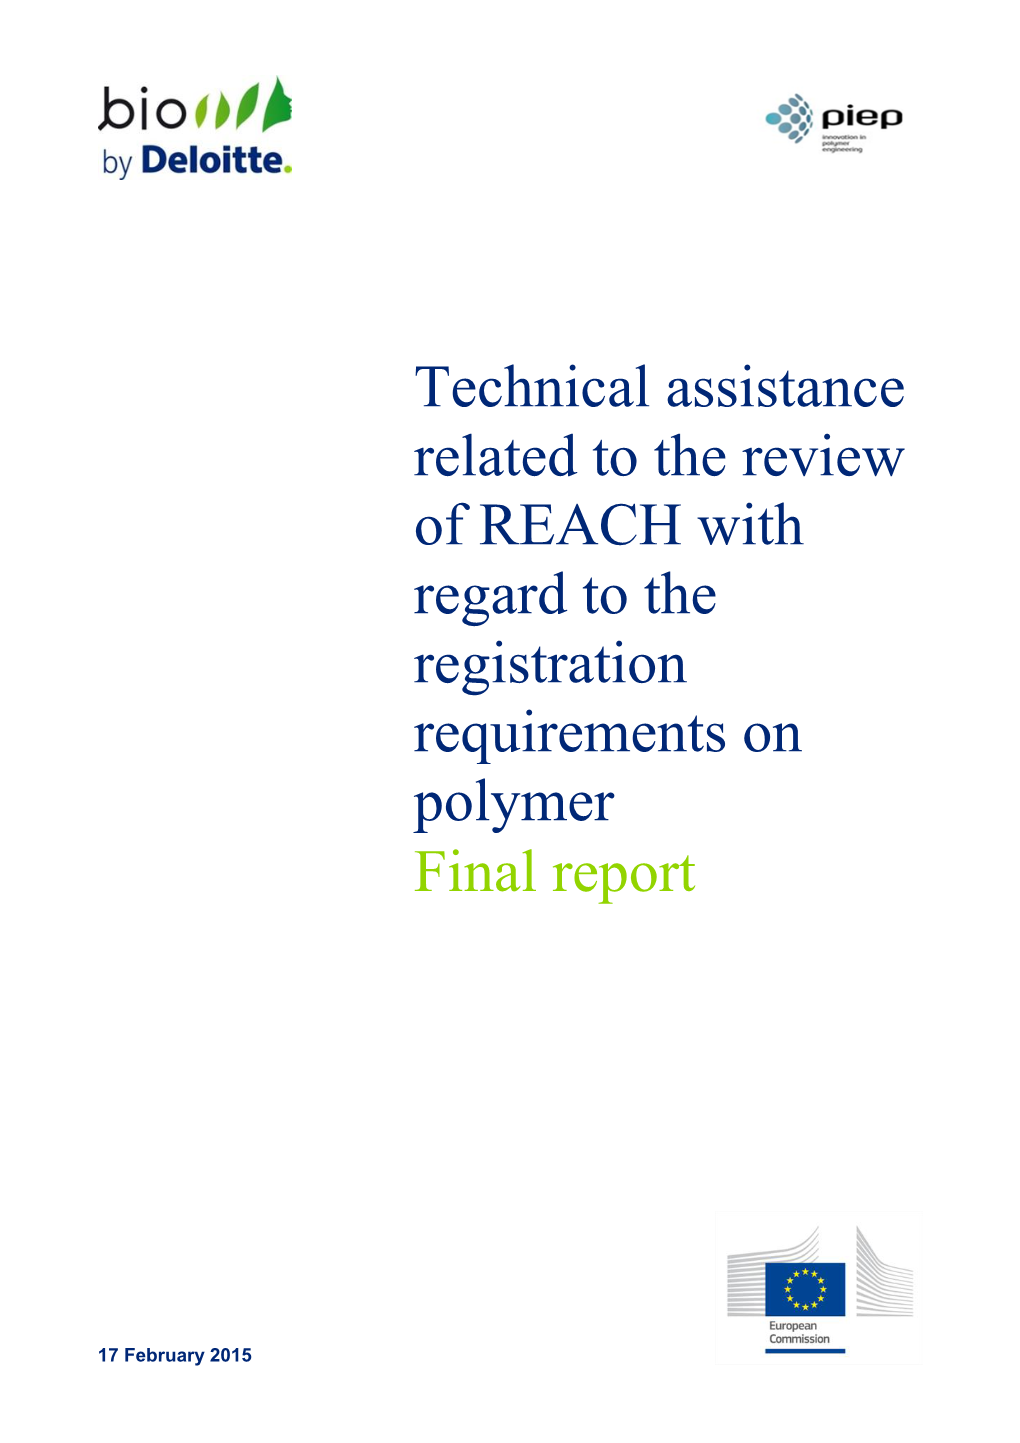 Technical Assistance Related to the Review of REACH with Regard to the Registration Requirements on Polymer Final Report